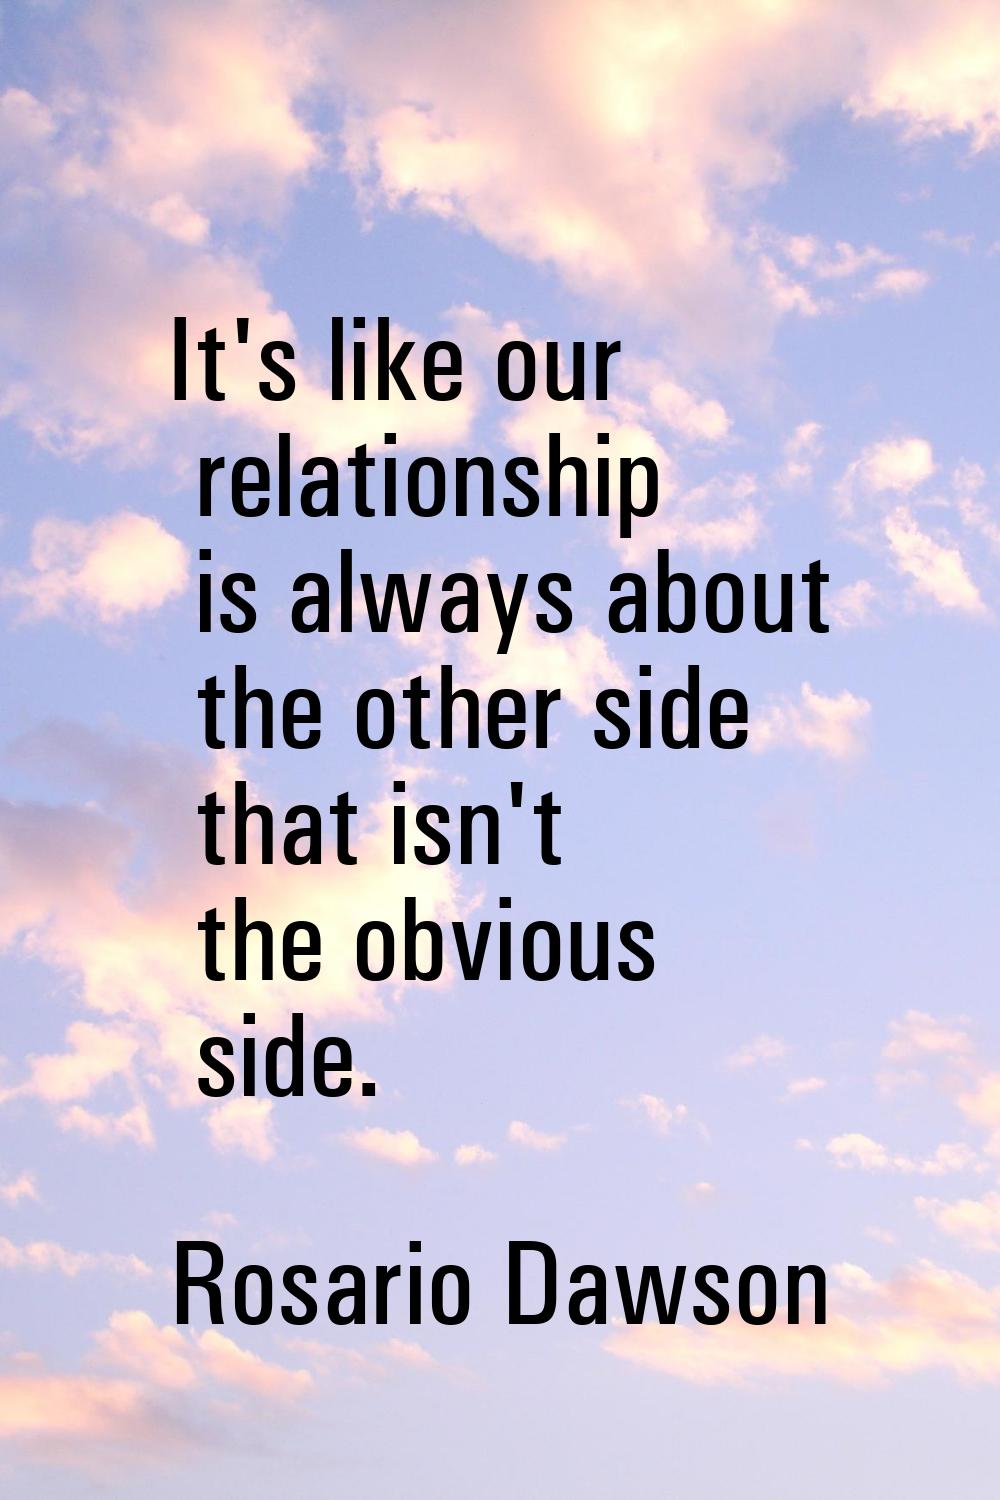 It's like our relationship is always about the other side that isn't the obvious side.